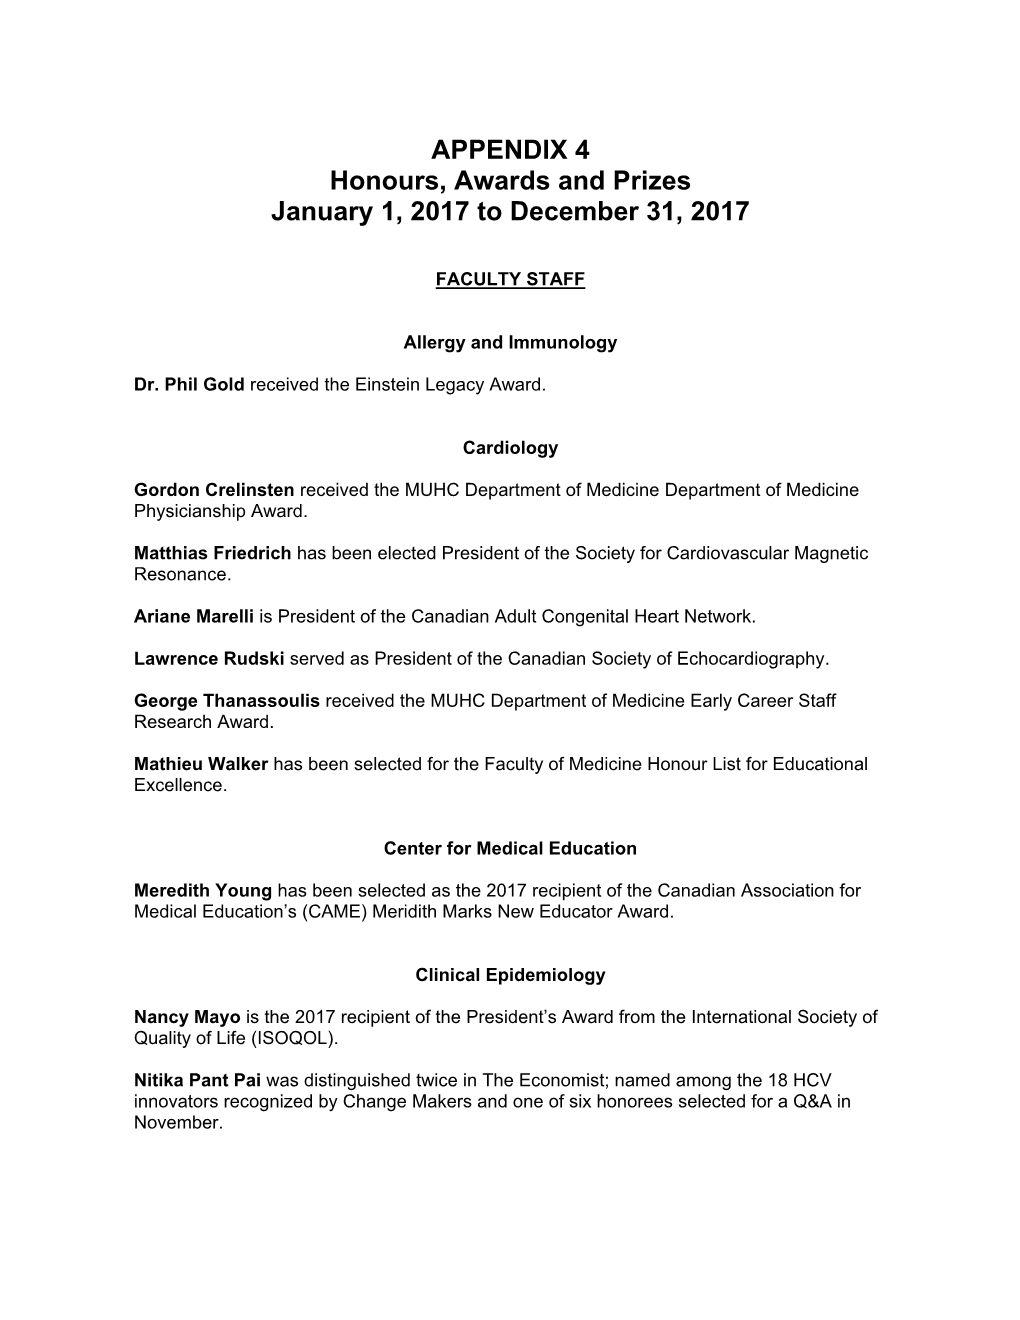 Honours, Awards and Prizes January 1, 2017 to December 31, 2017